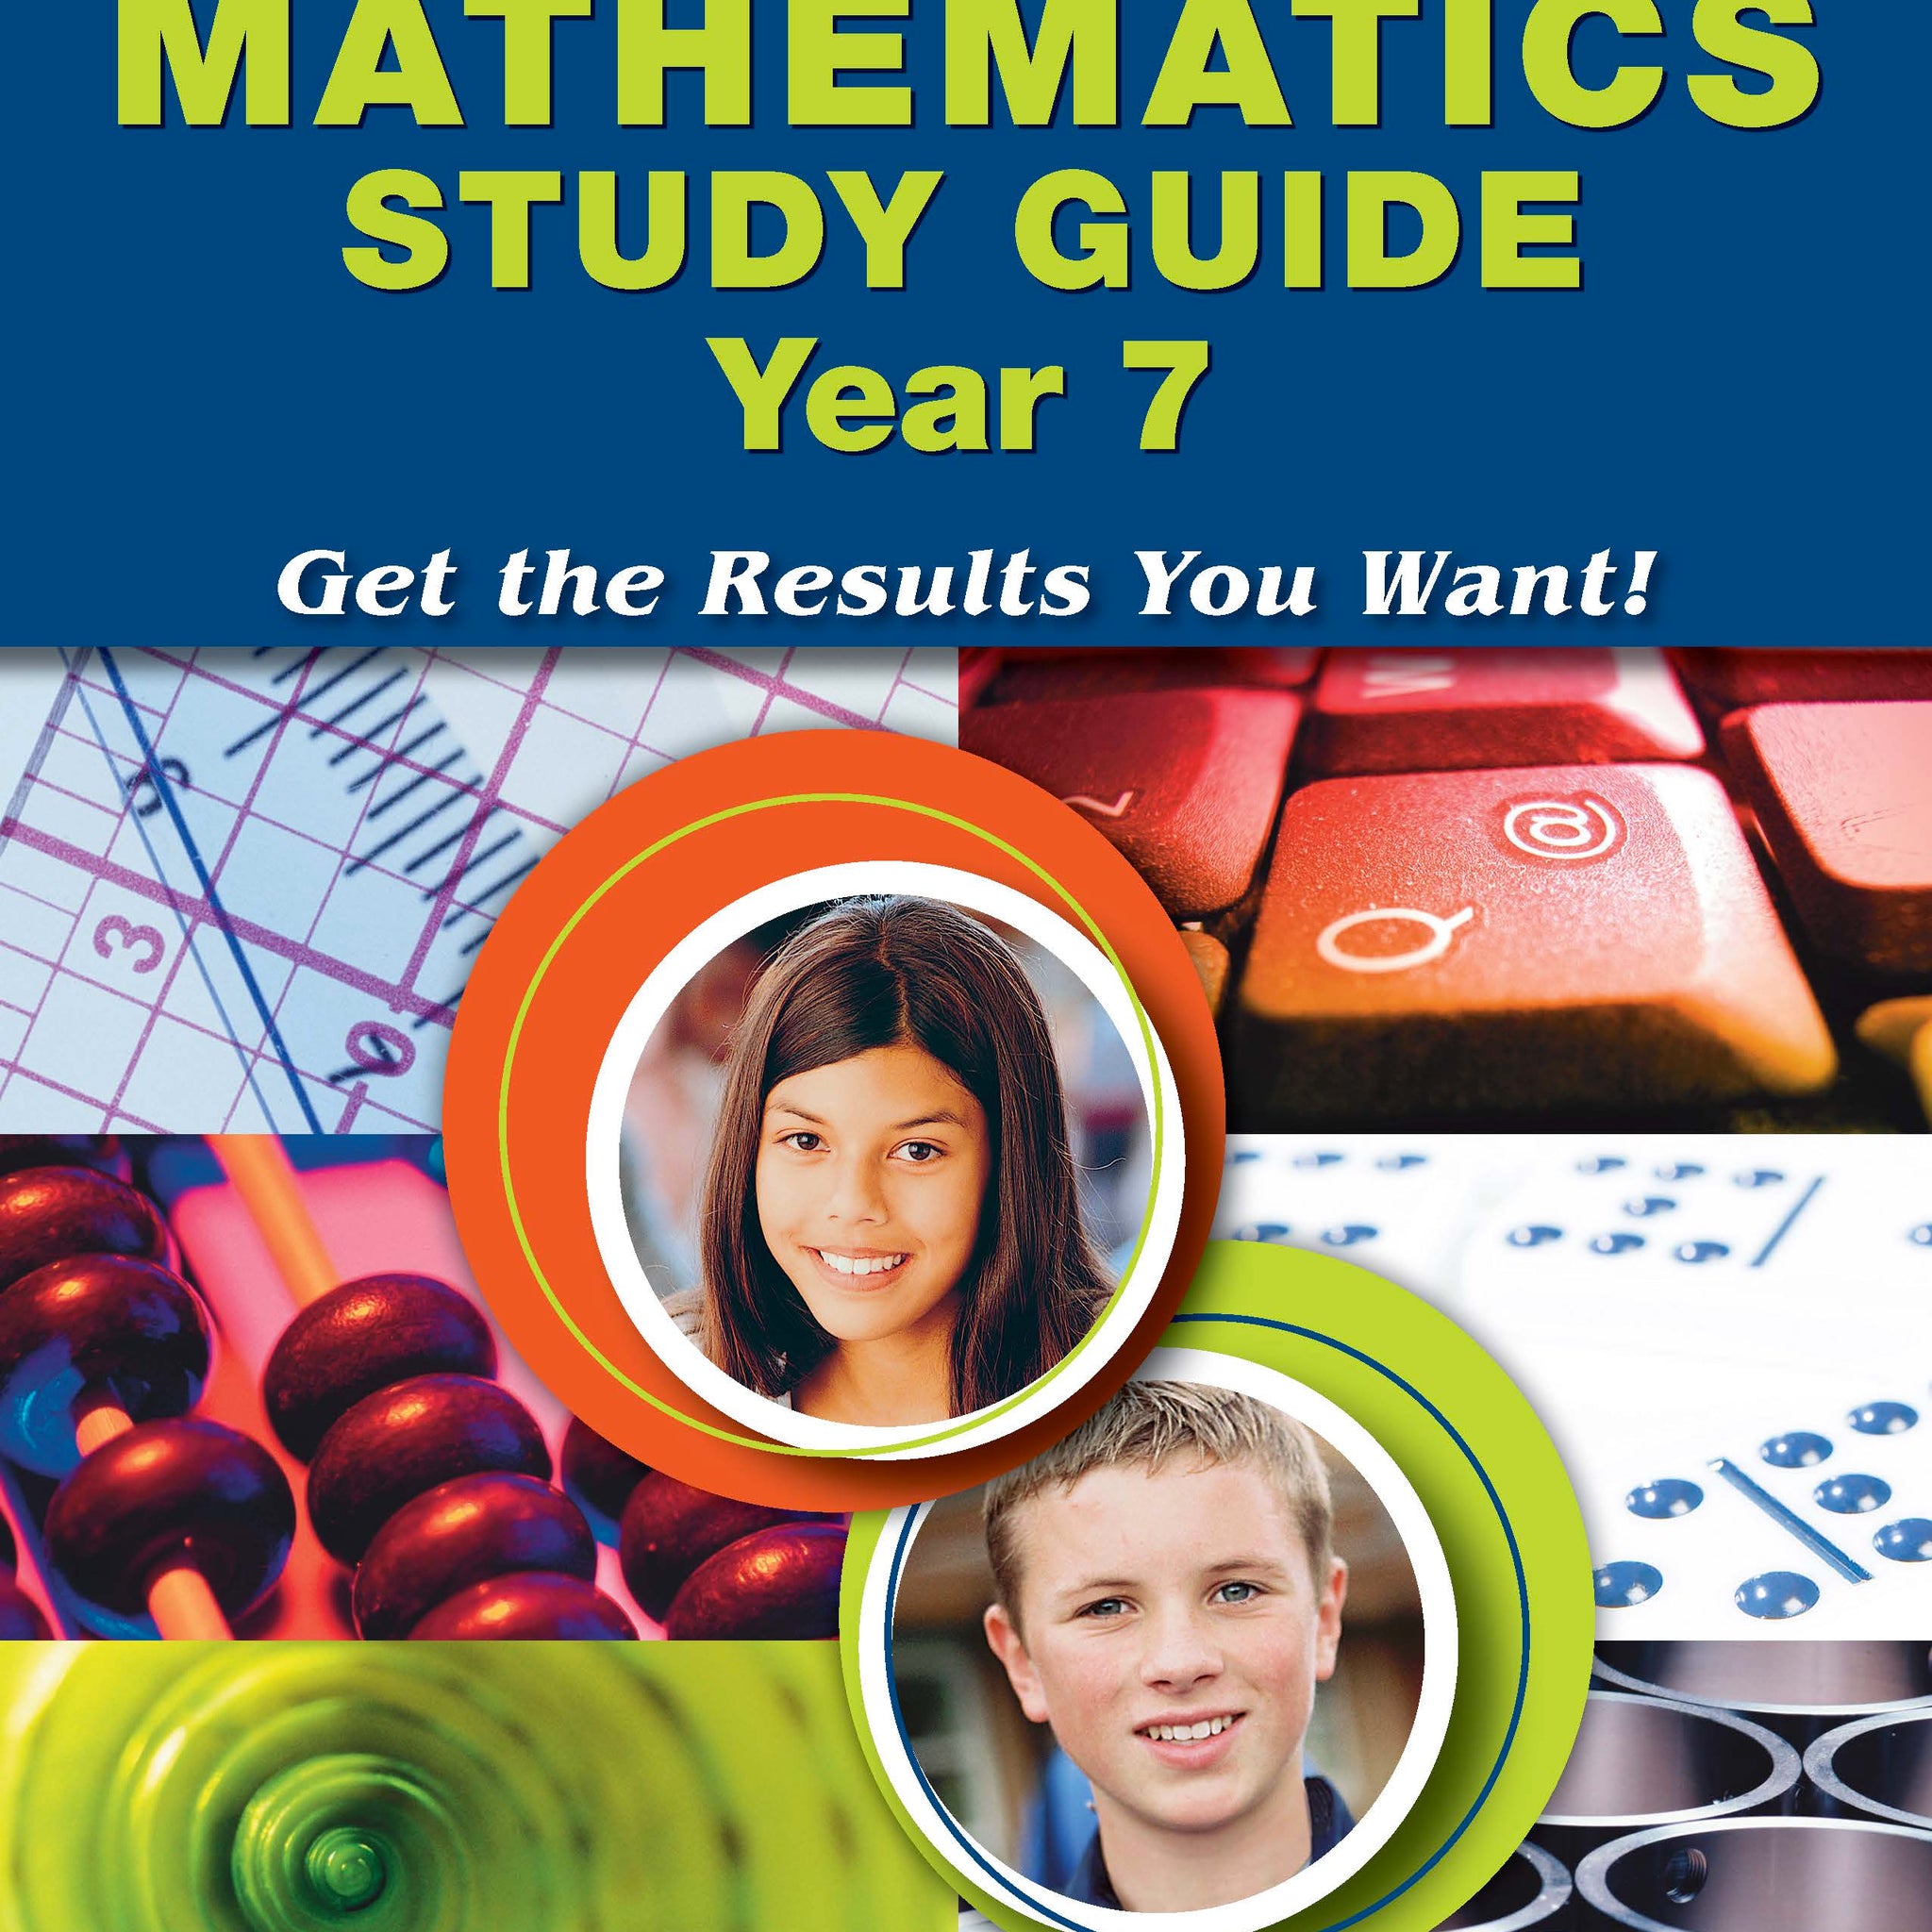 Excel Mathematics Study Guide Year 7